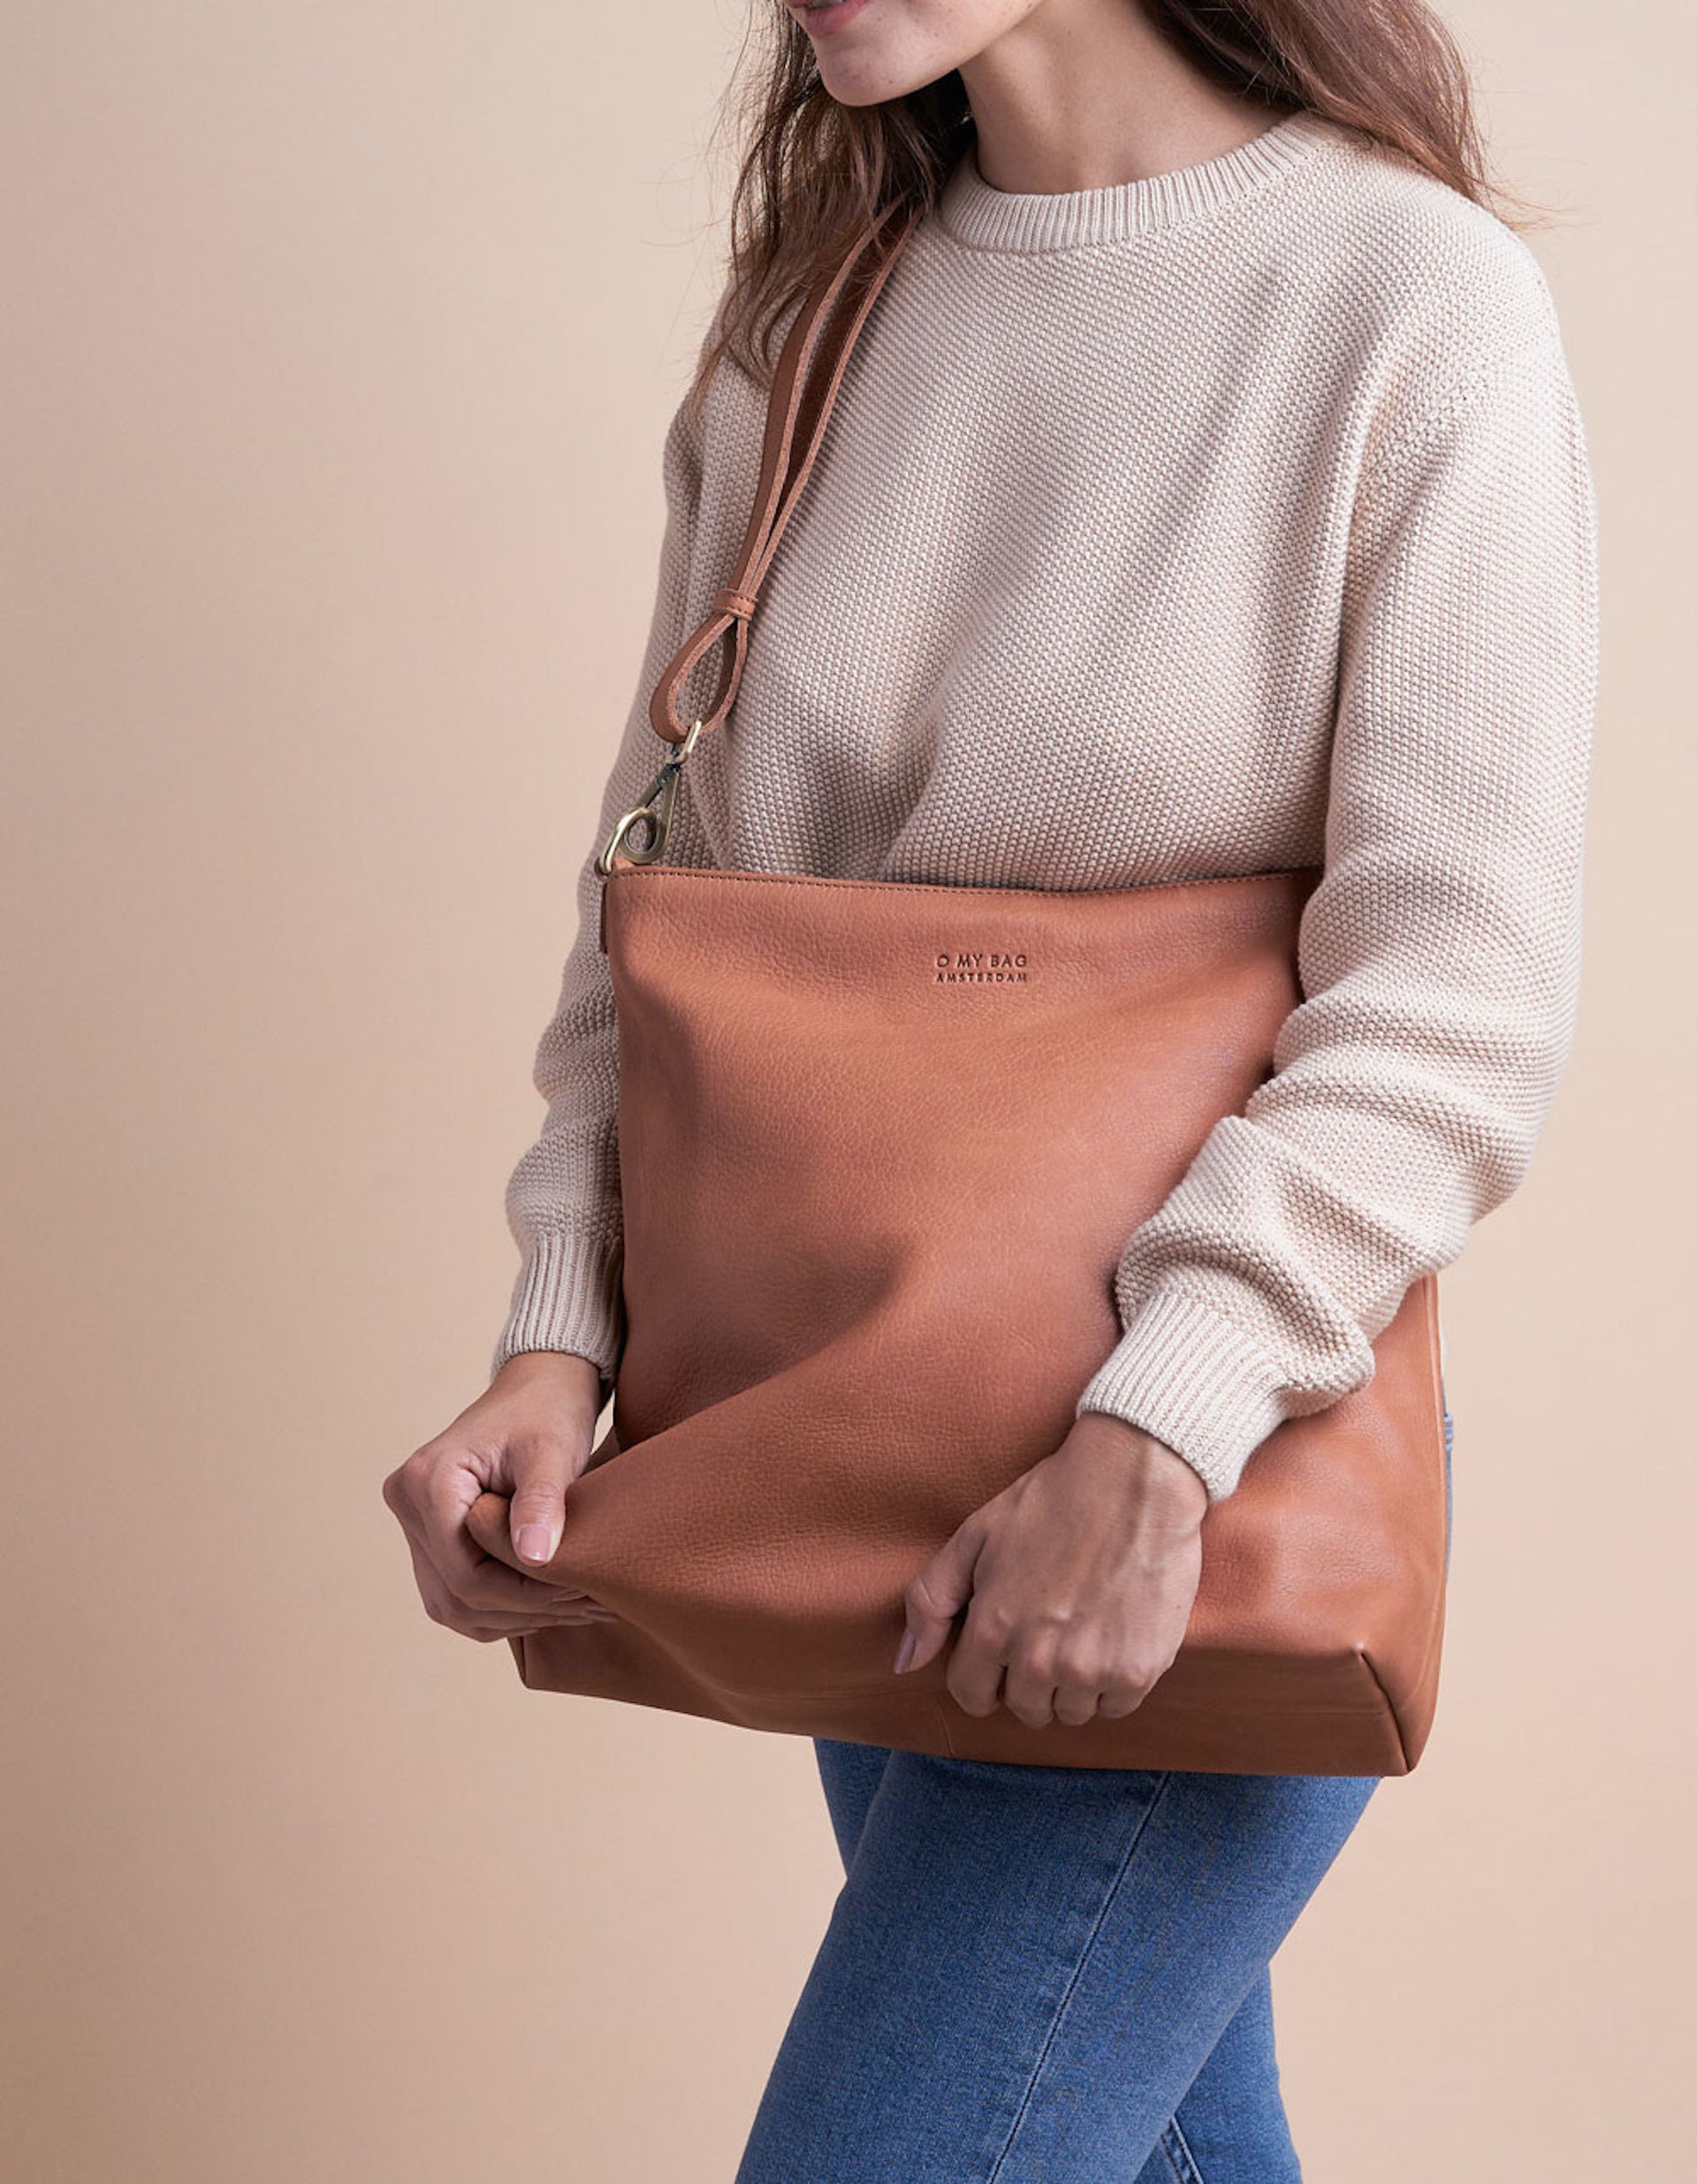 Wild Oak Leather shopper bag. Square shape with an adjustable and removable strap. Model product image.